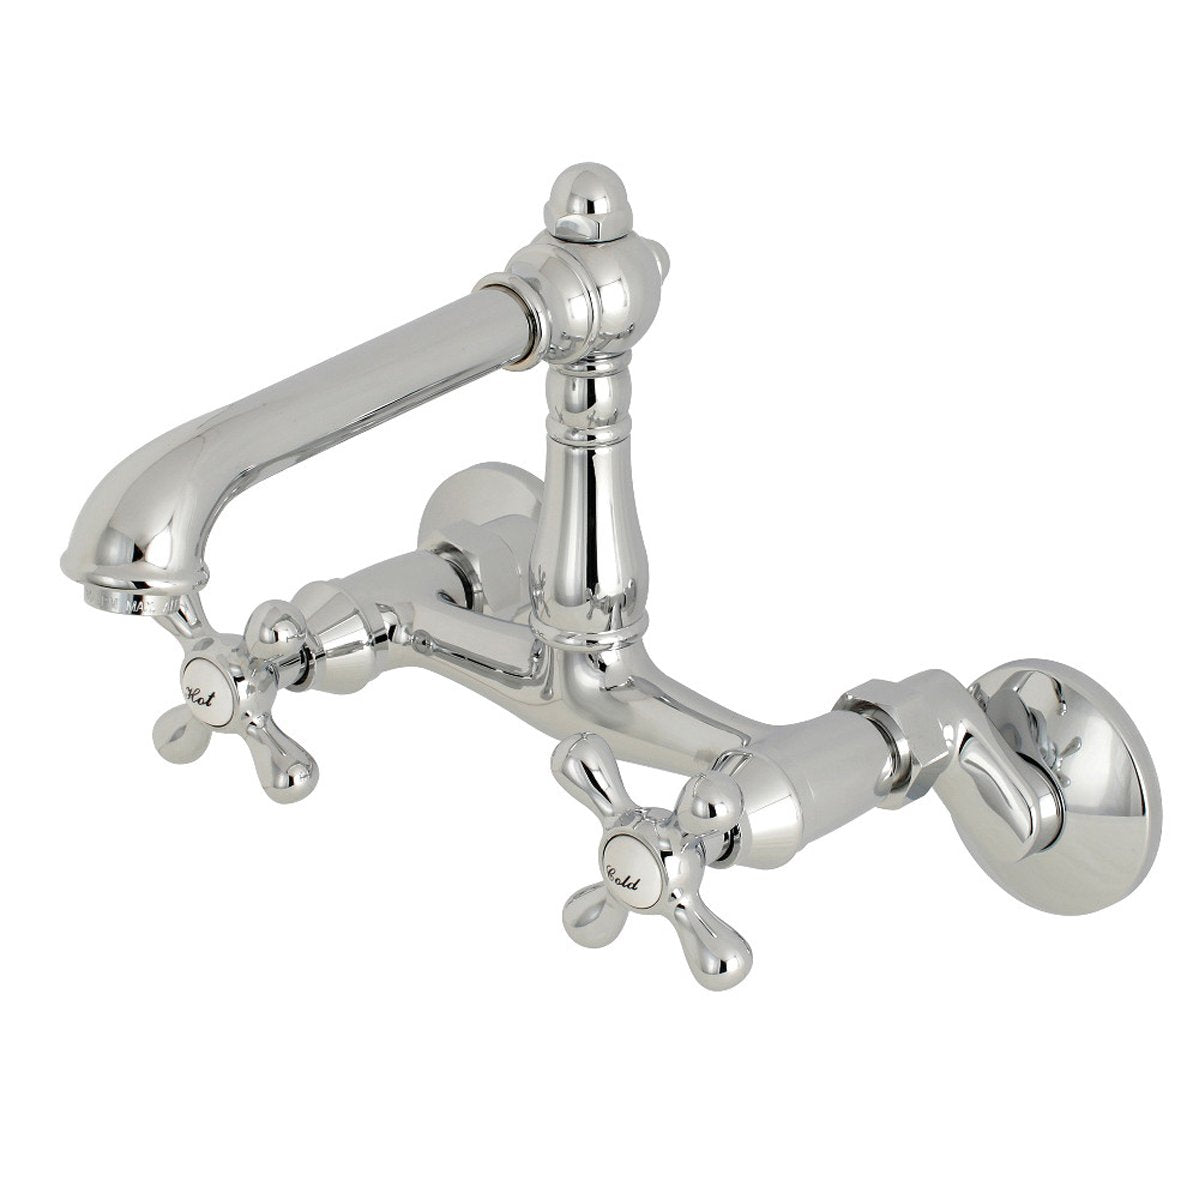 Kingston Brass English Country 6-Inch Adjustable Center Wall Mount Kitchen Faucet